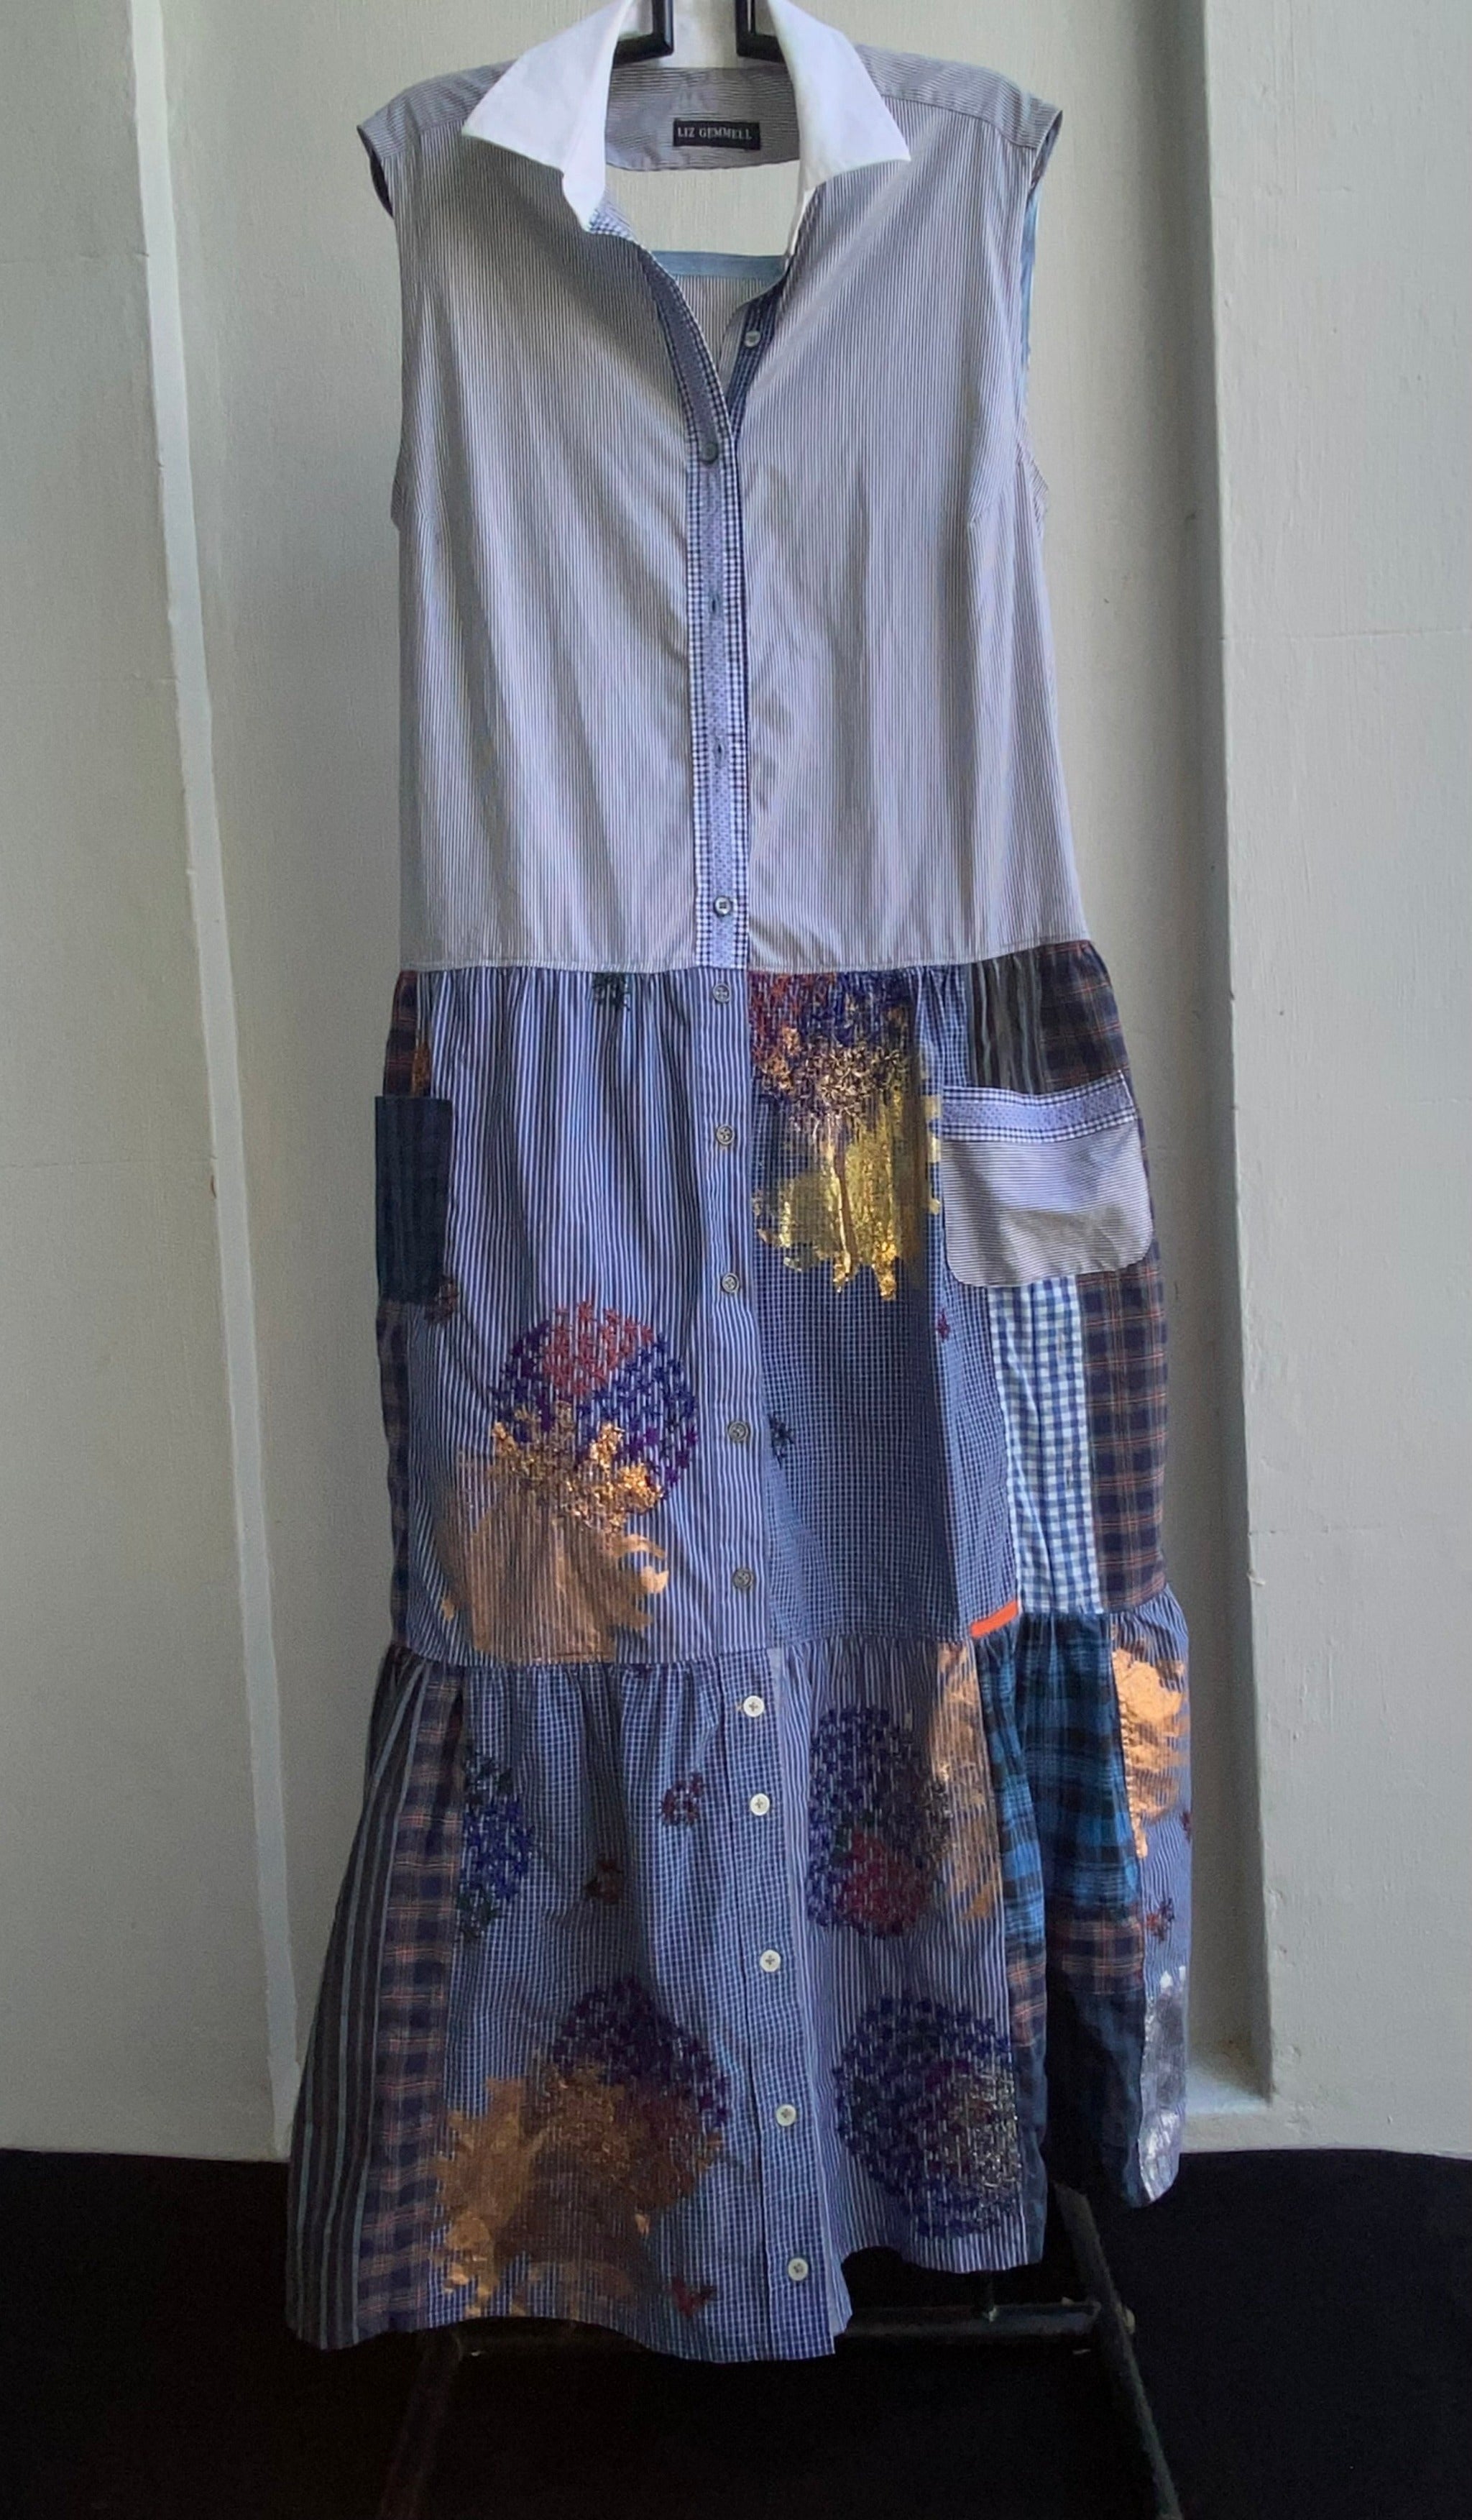 Upcycled tiered cotton dress handmade by Liz Gemmell